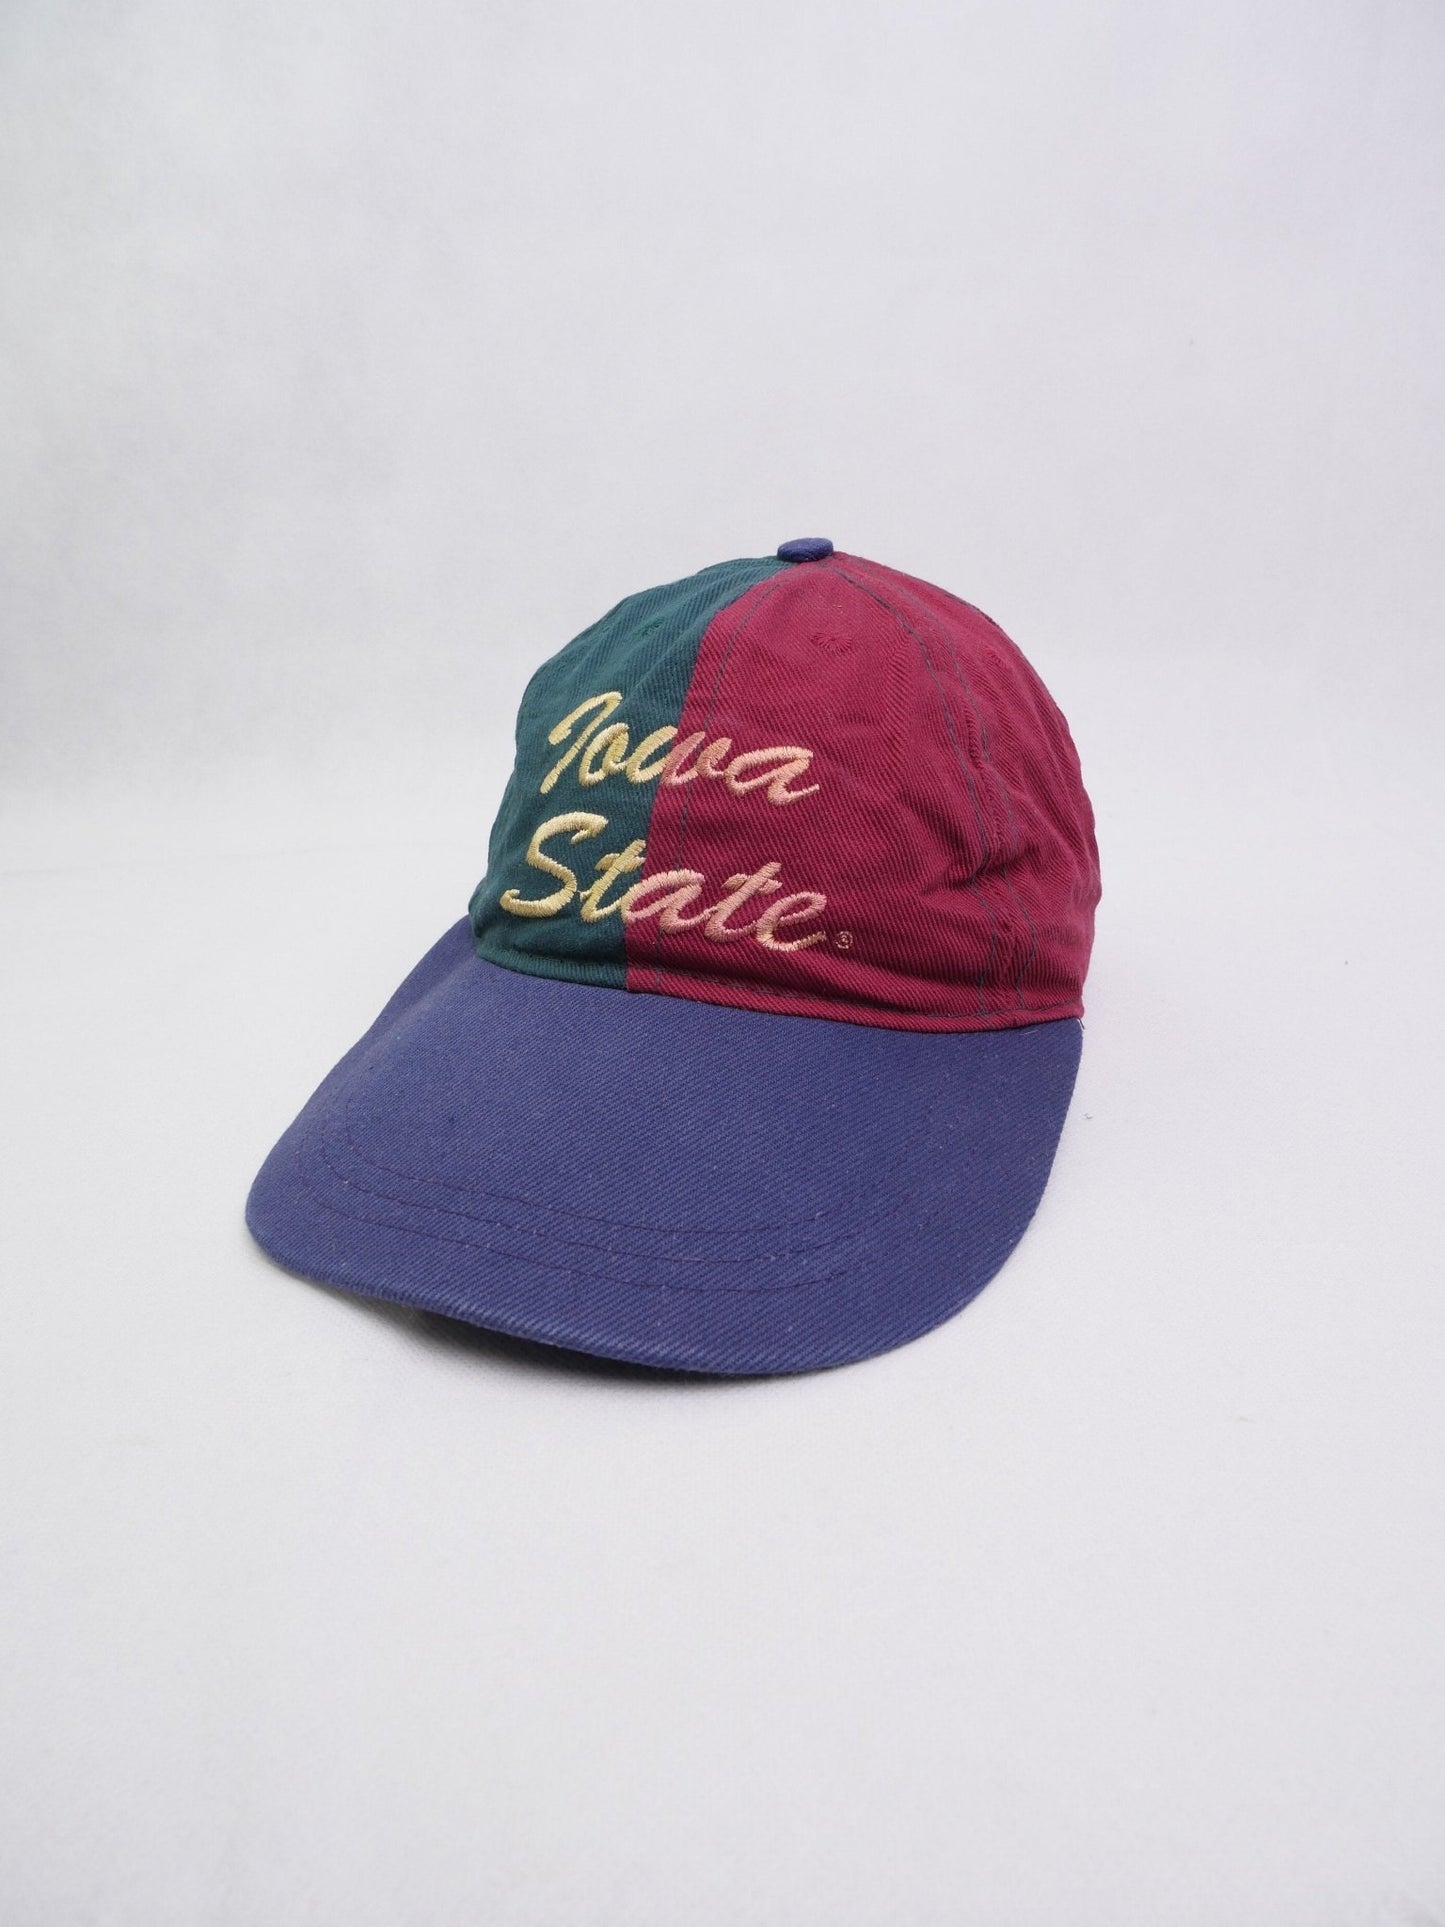 Iowa State embroidered Logo three toned Vintage Cap Accessoire - Peeces